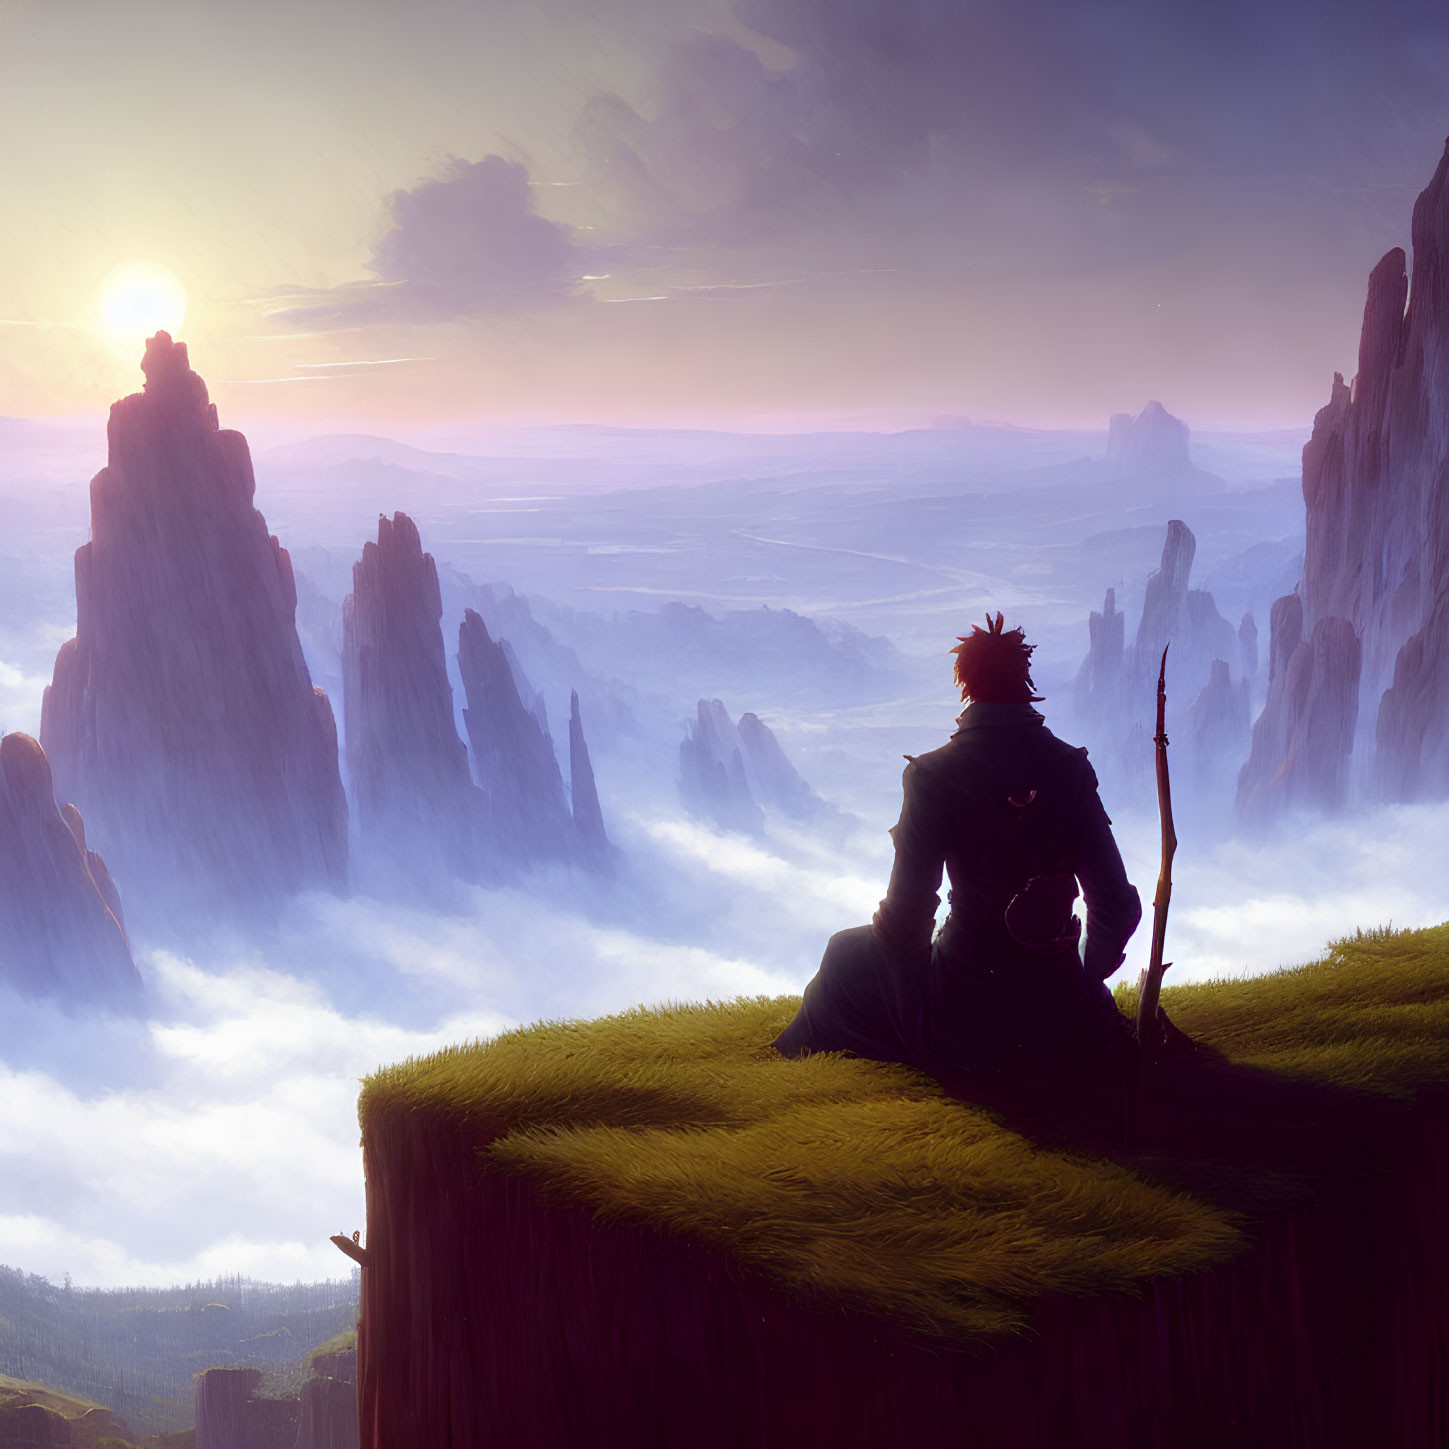 Warrior on Grass Cliff Overlooking Canyon at Sunrise